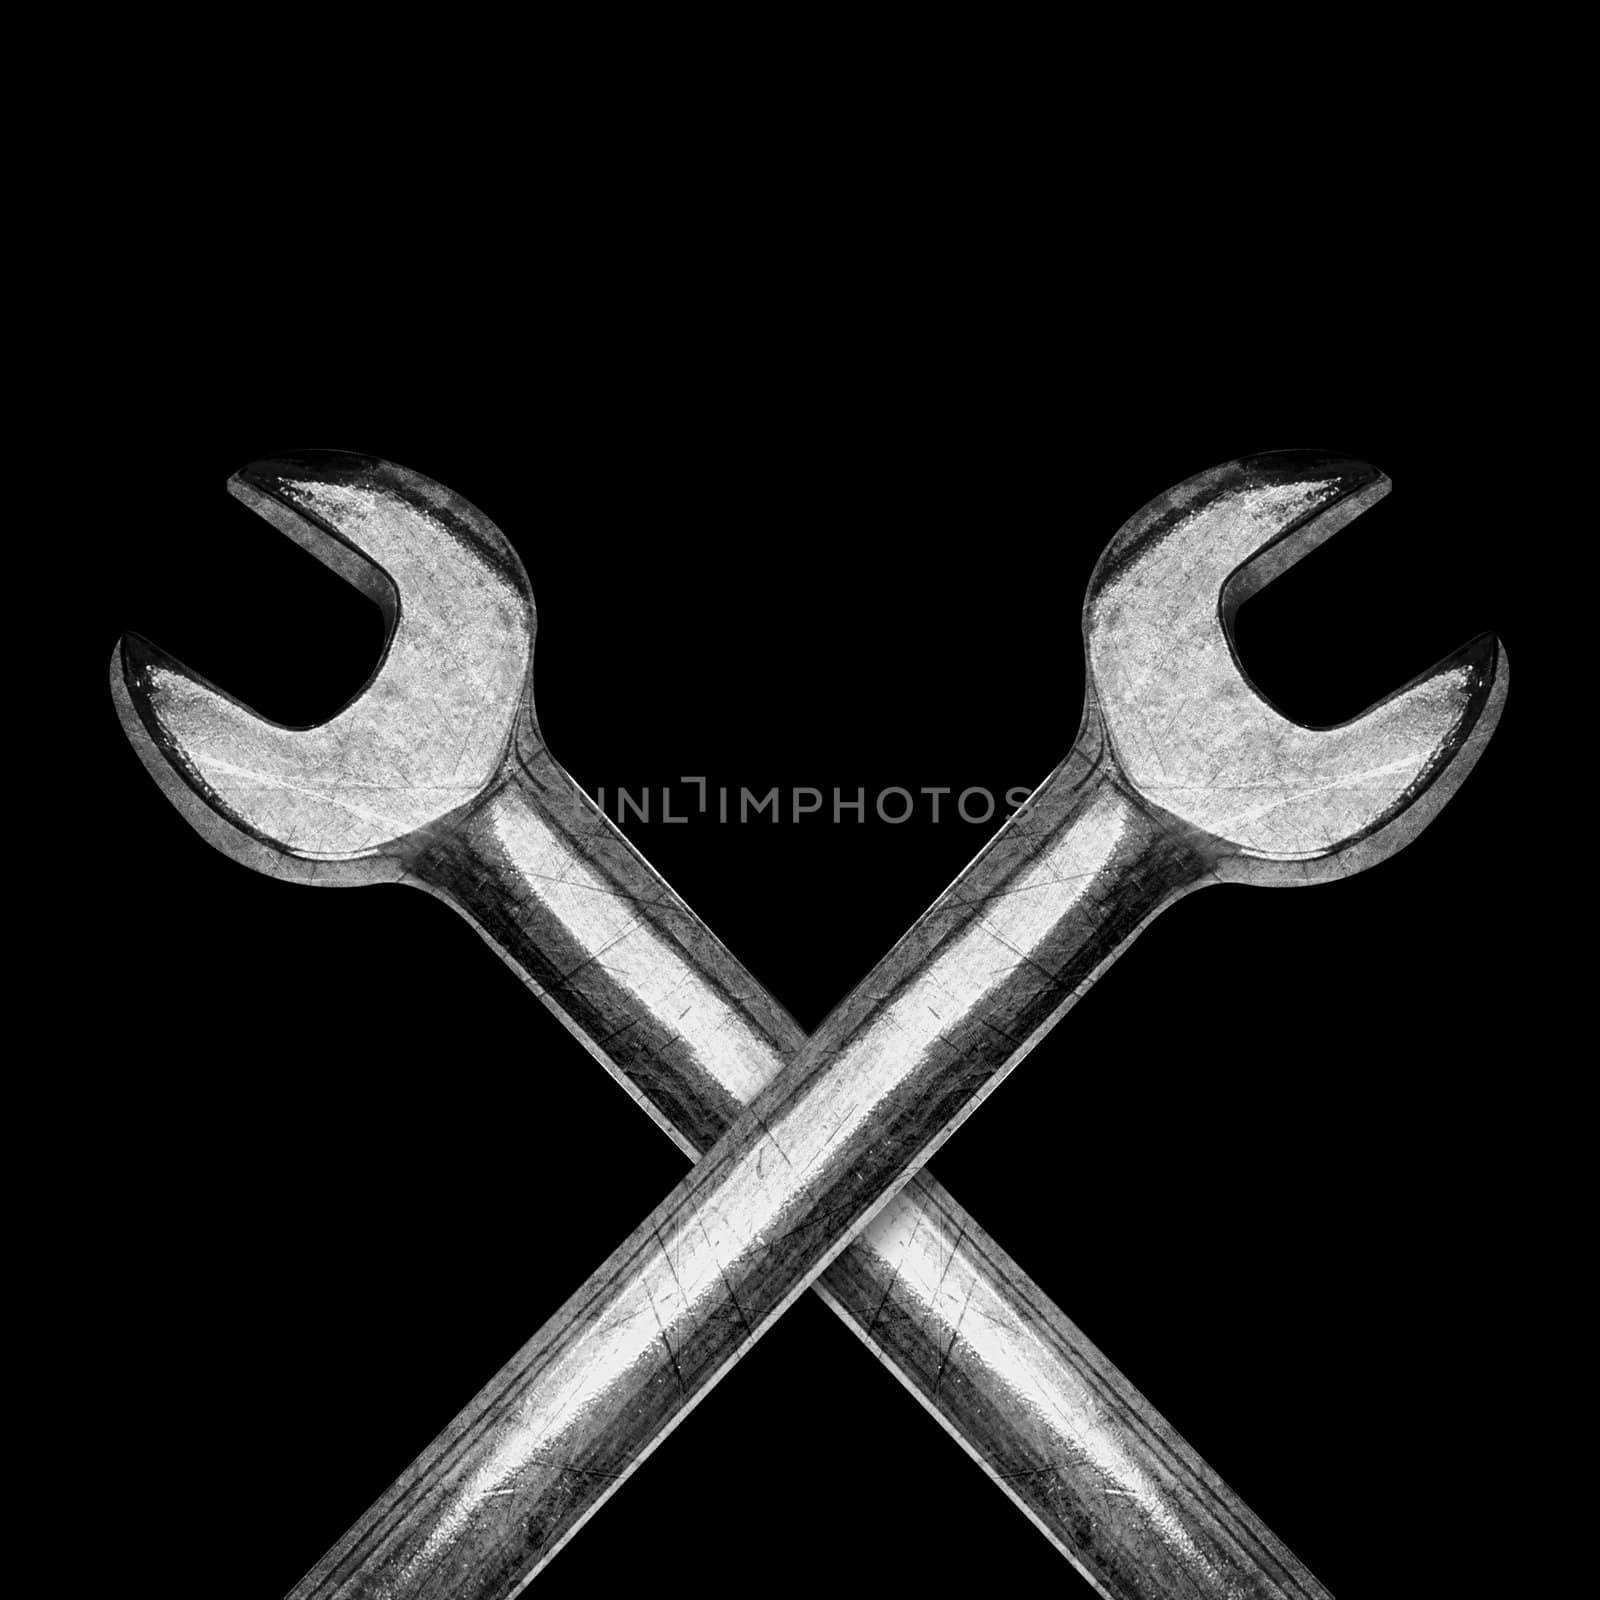 Two spanners or wrenchs on black background.